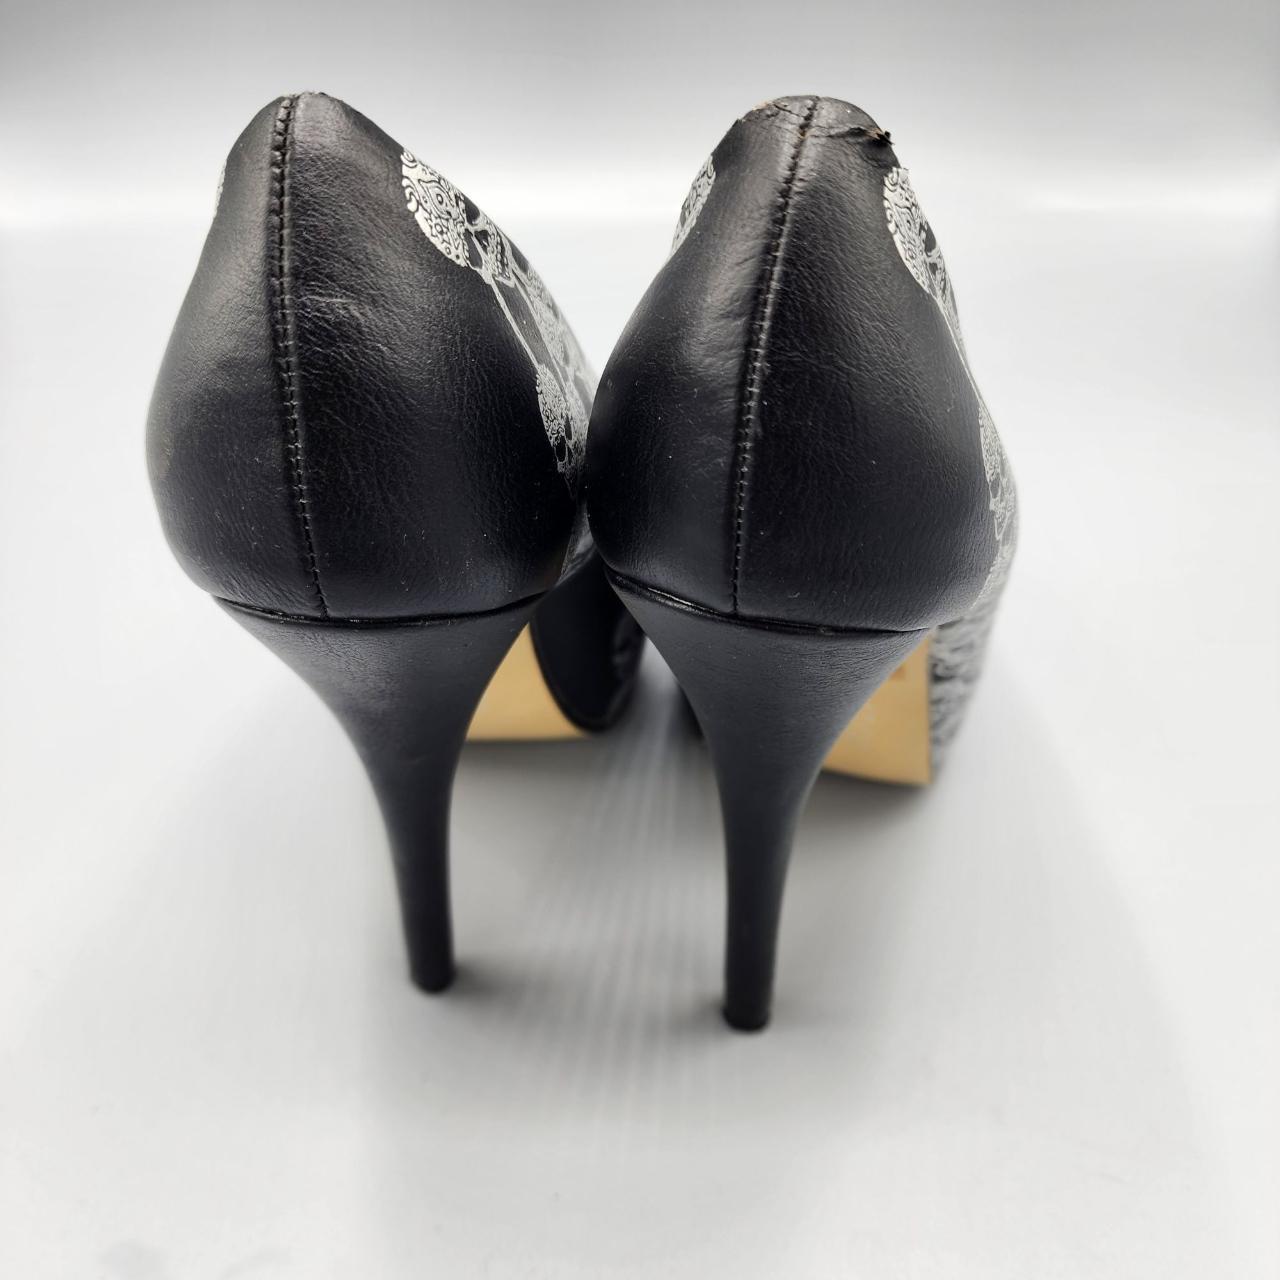 Iron Fist Women's Black and Silver Courts (6)